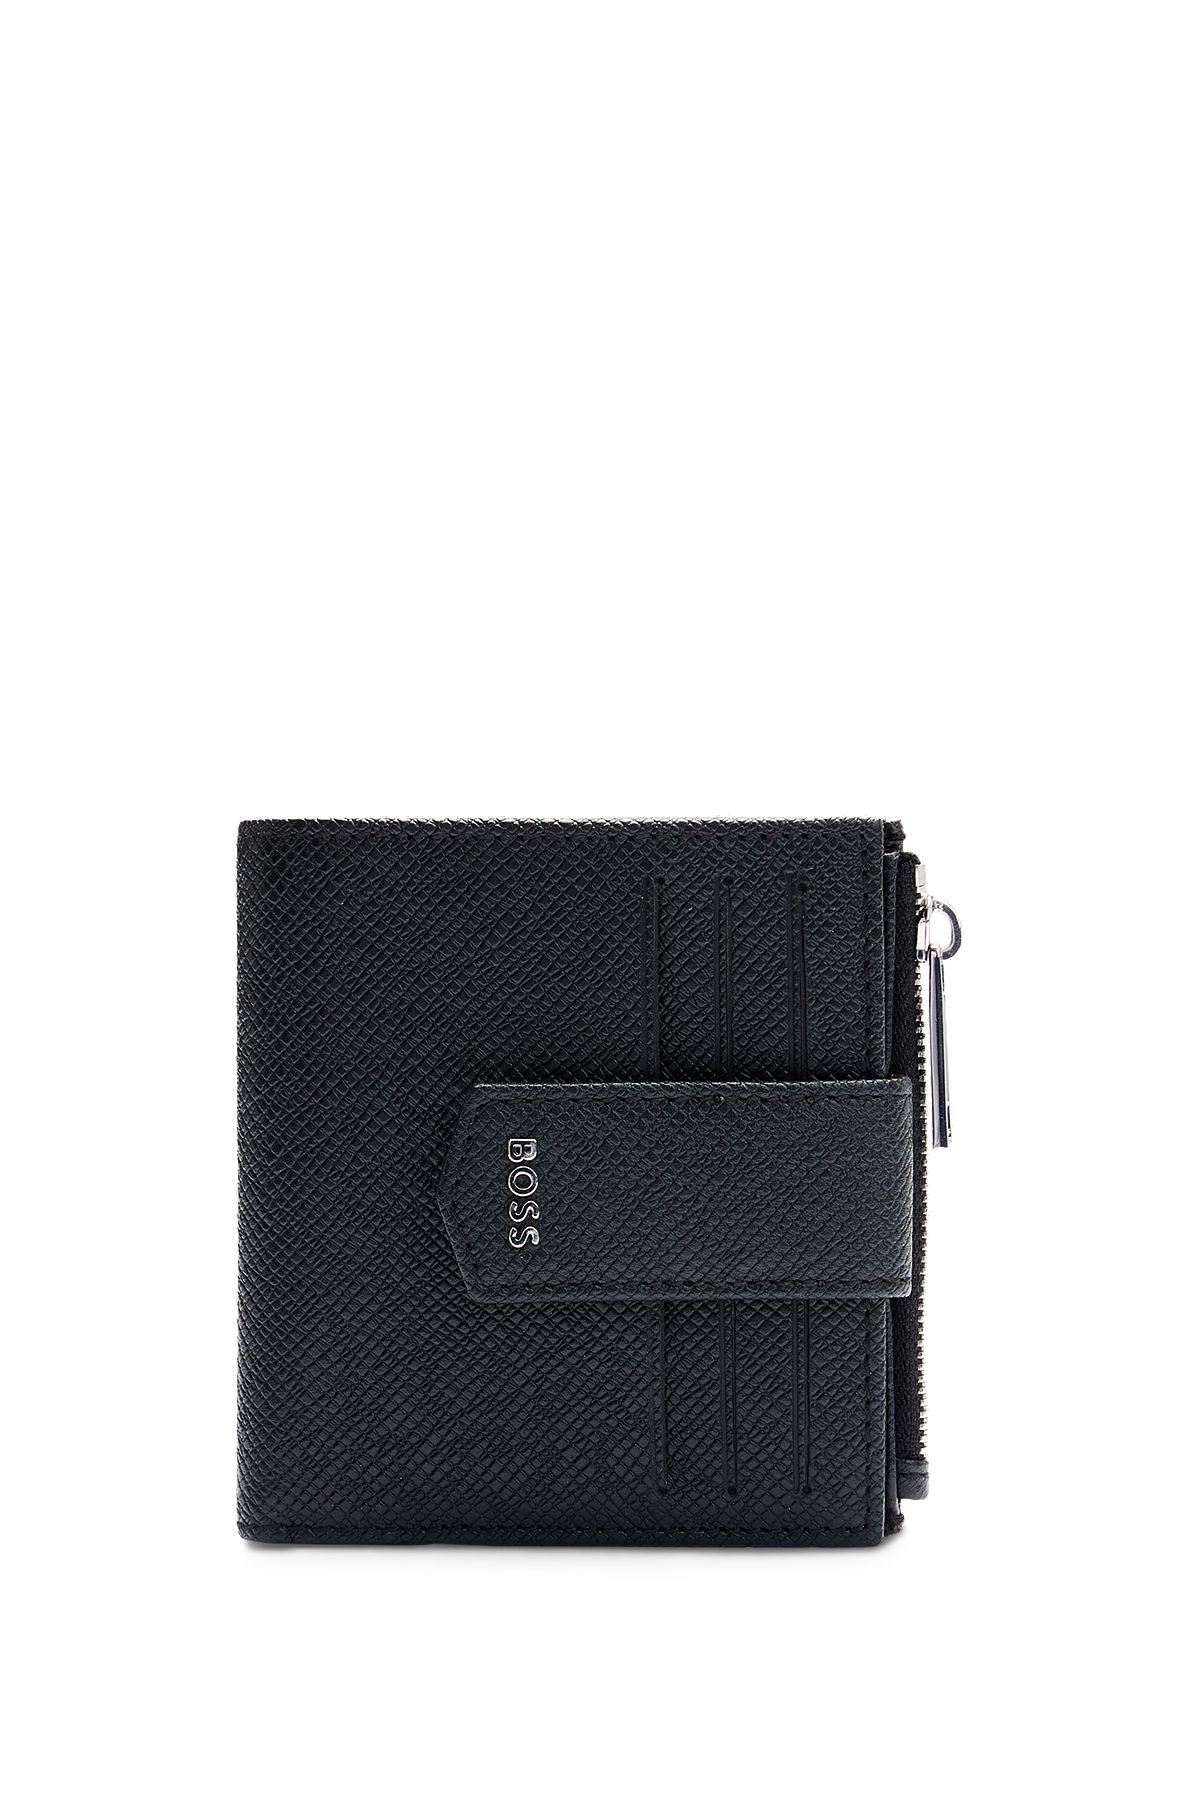 Embossed-leather wallet with polished silver hardware, Black